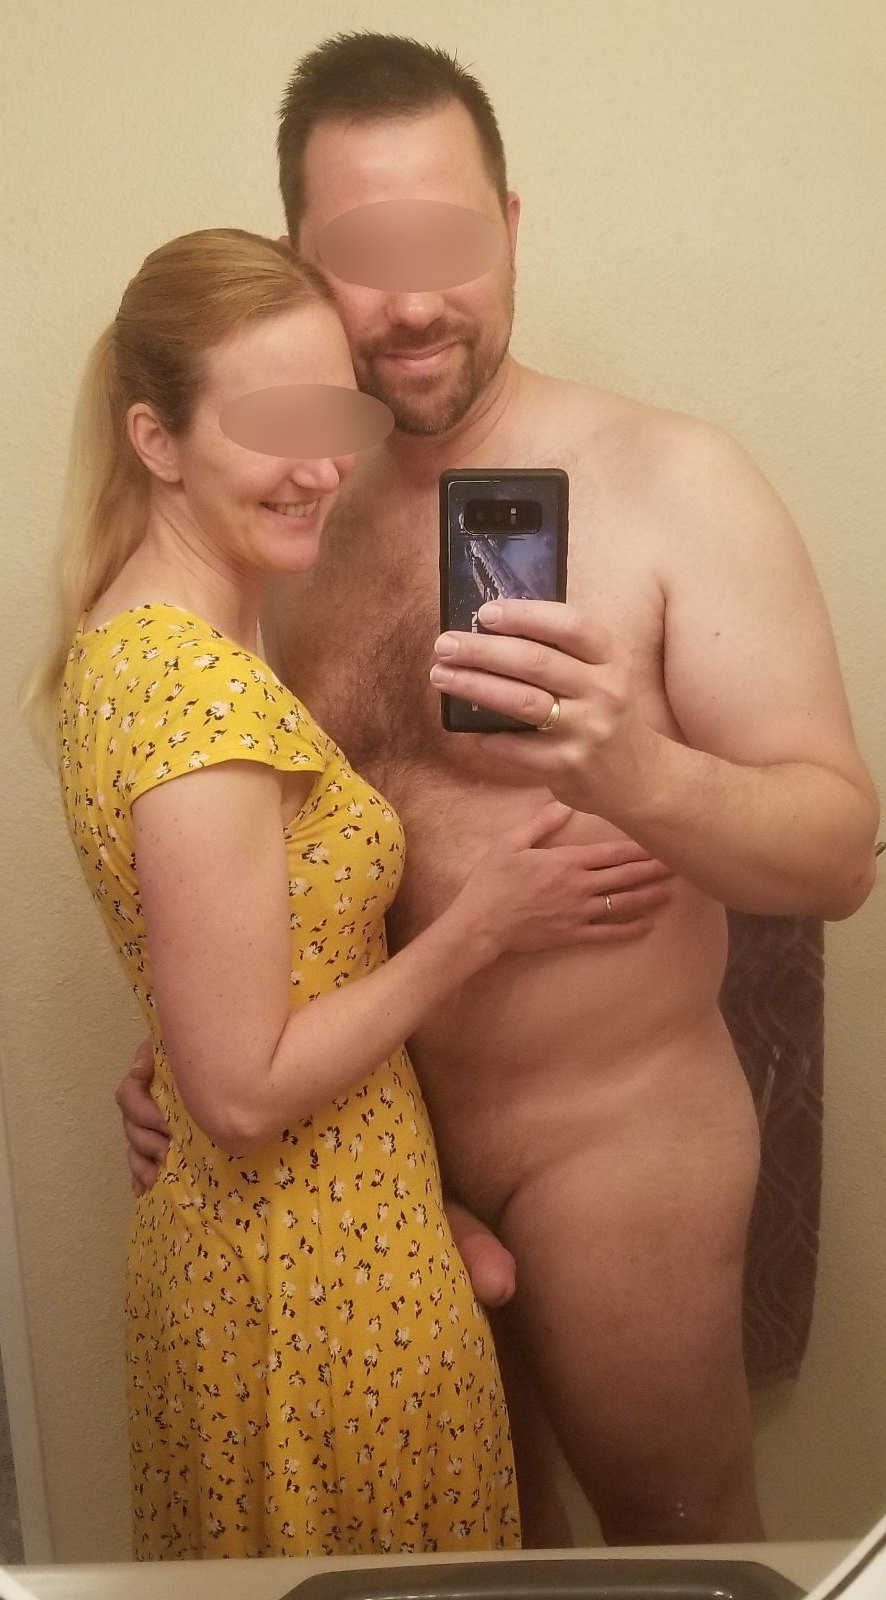 amateur porn, CFNM photo, wife with a naked picture